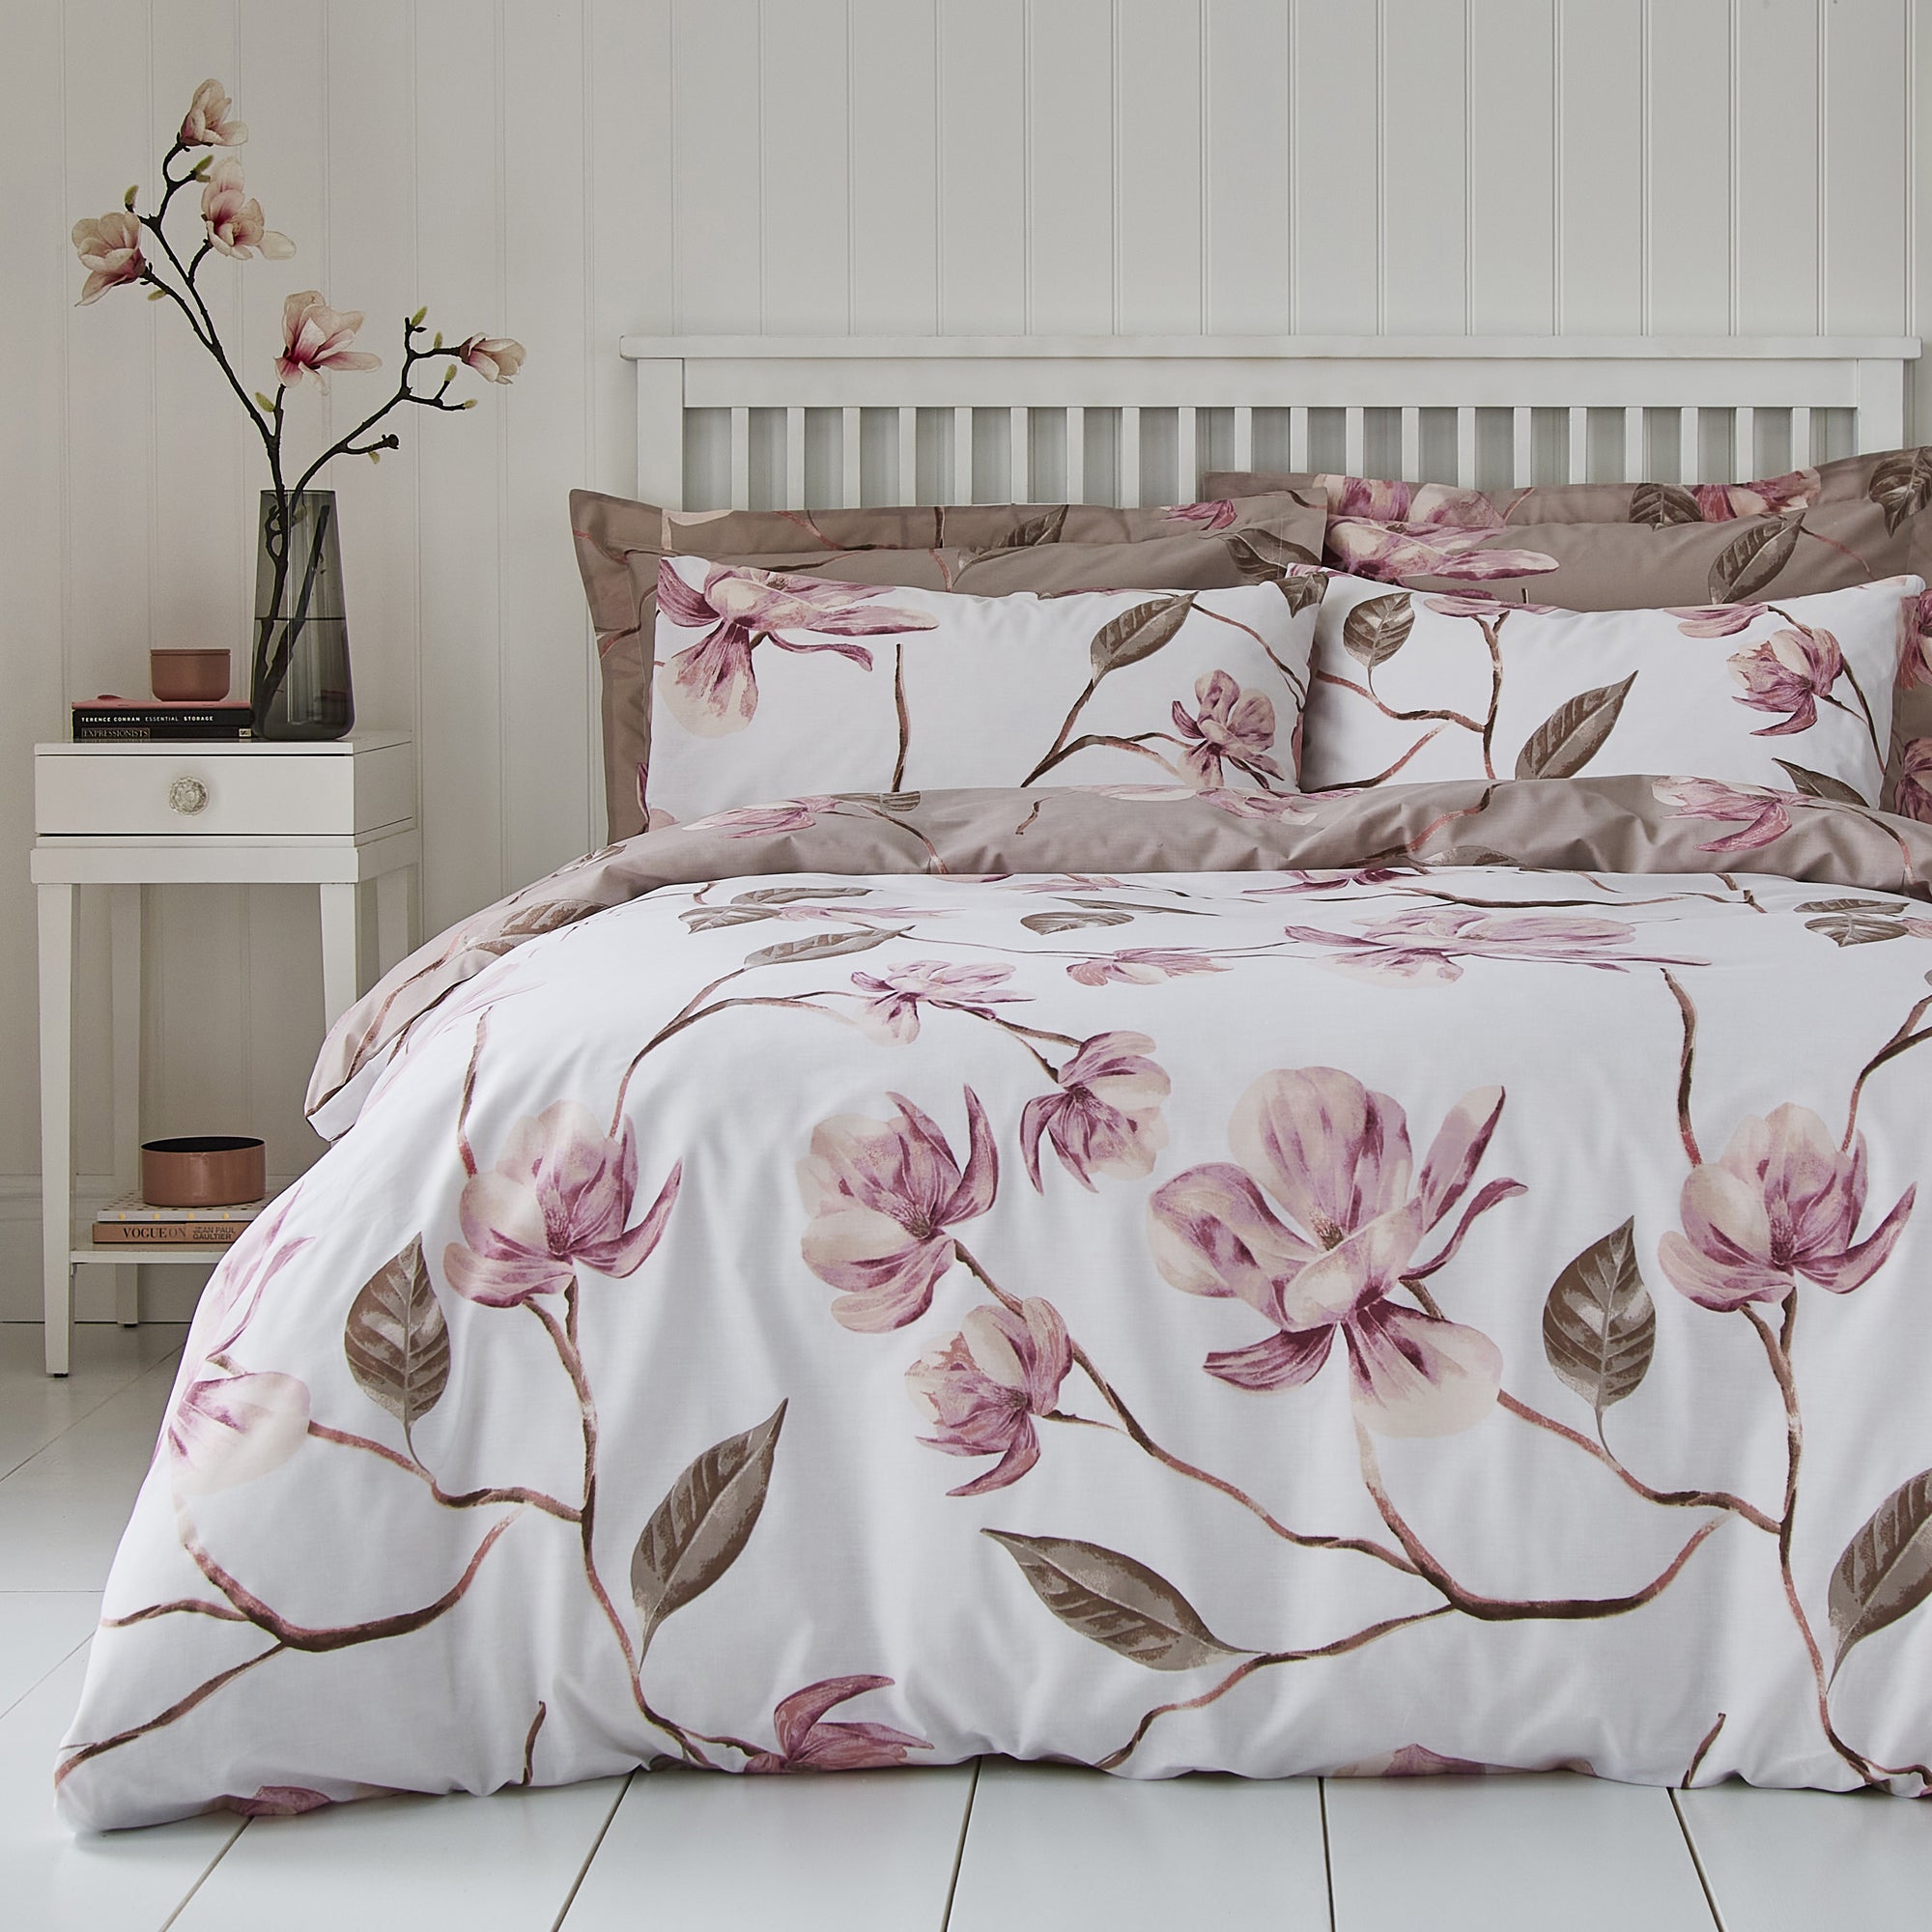 Lois Large Floral Pink Duvet Cover And Pillowcase Set Pink Brown And White